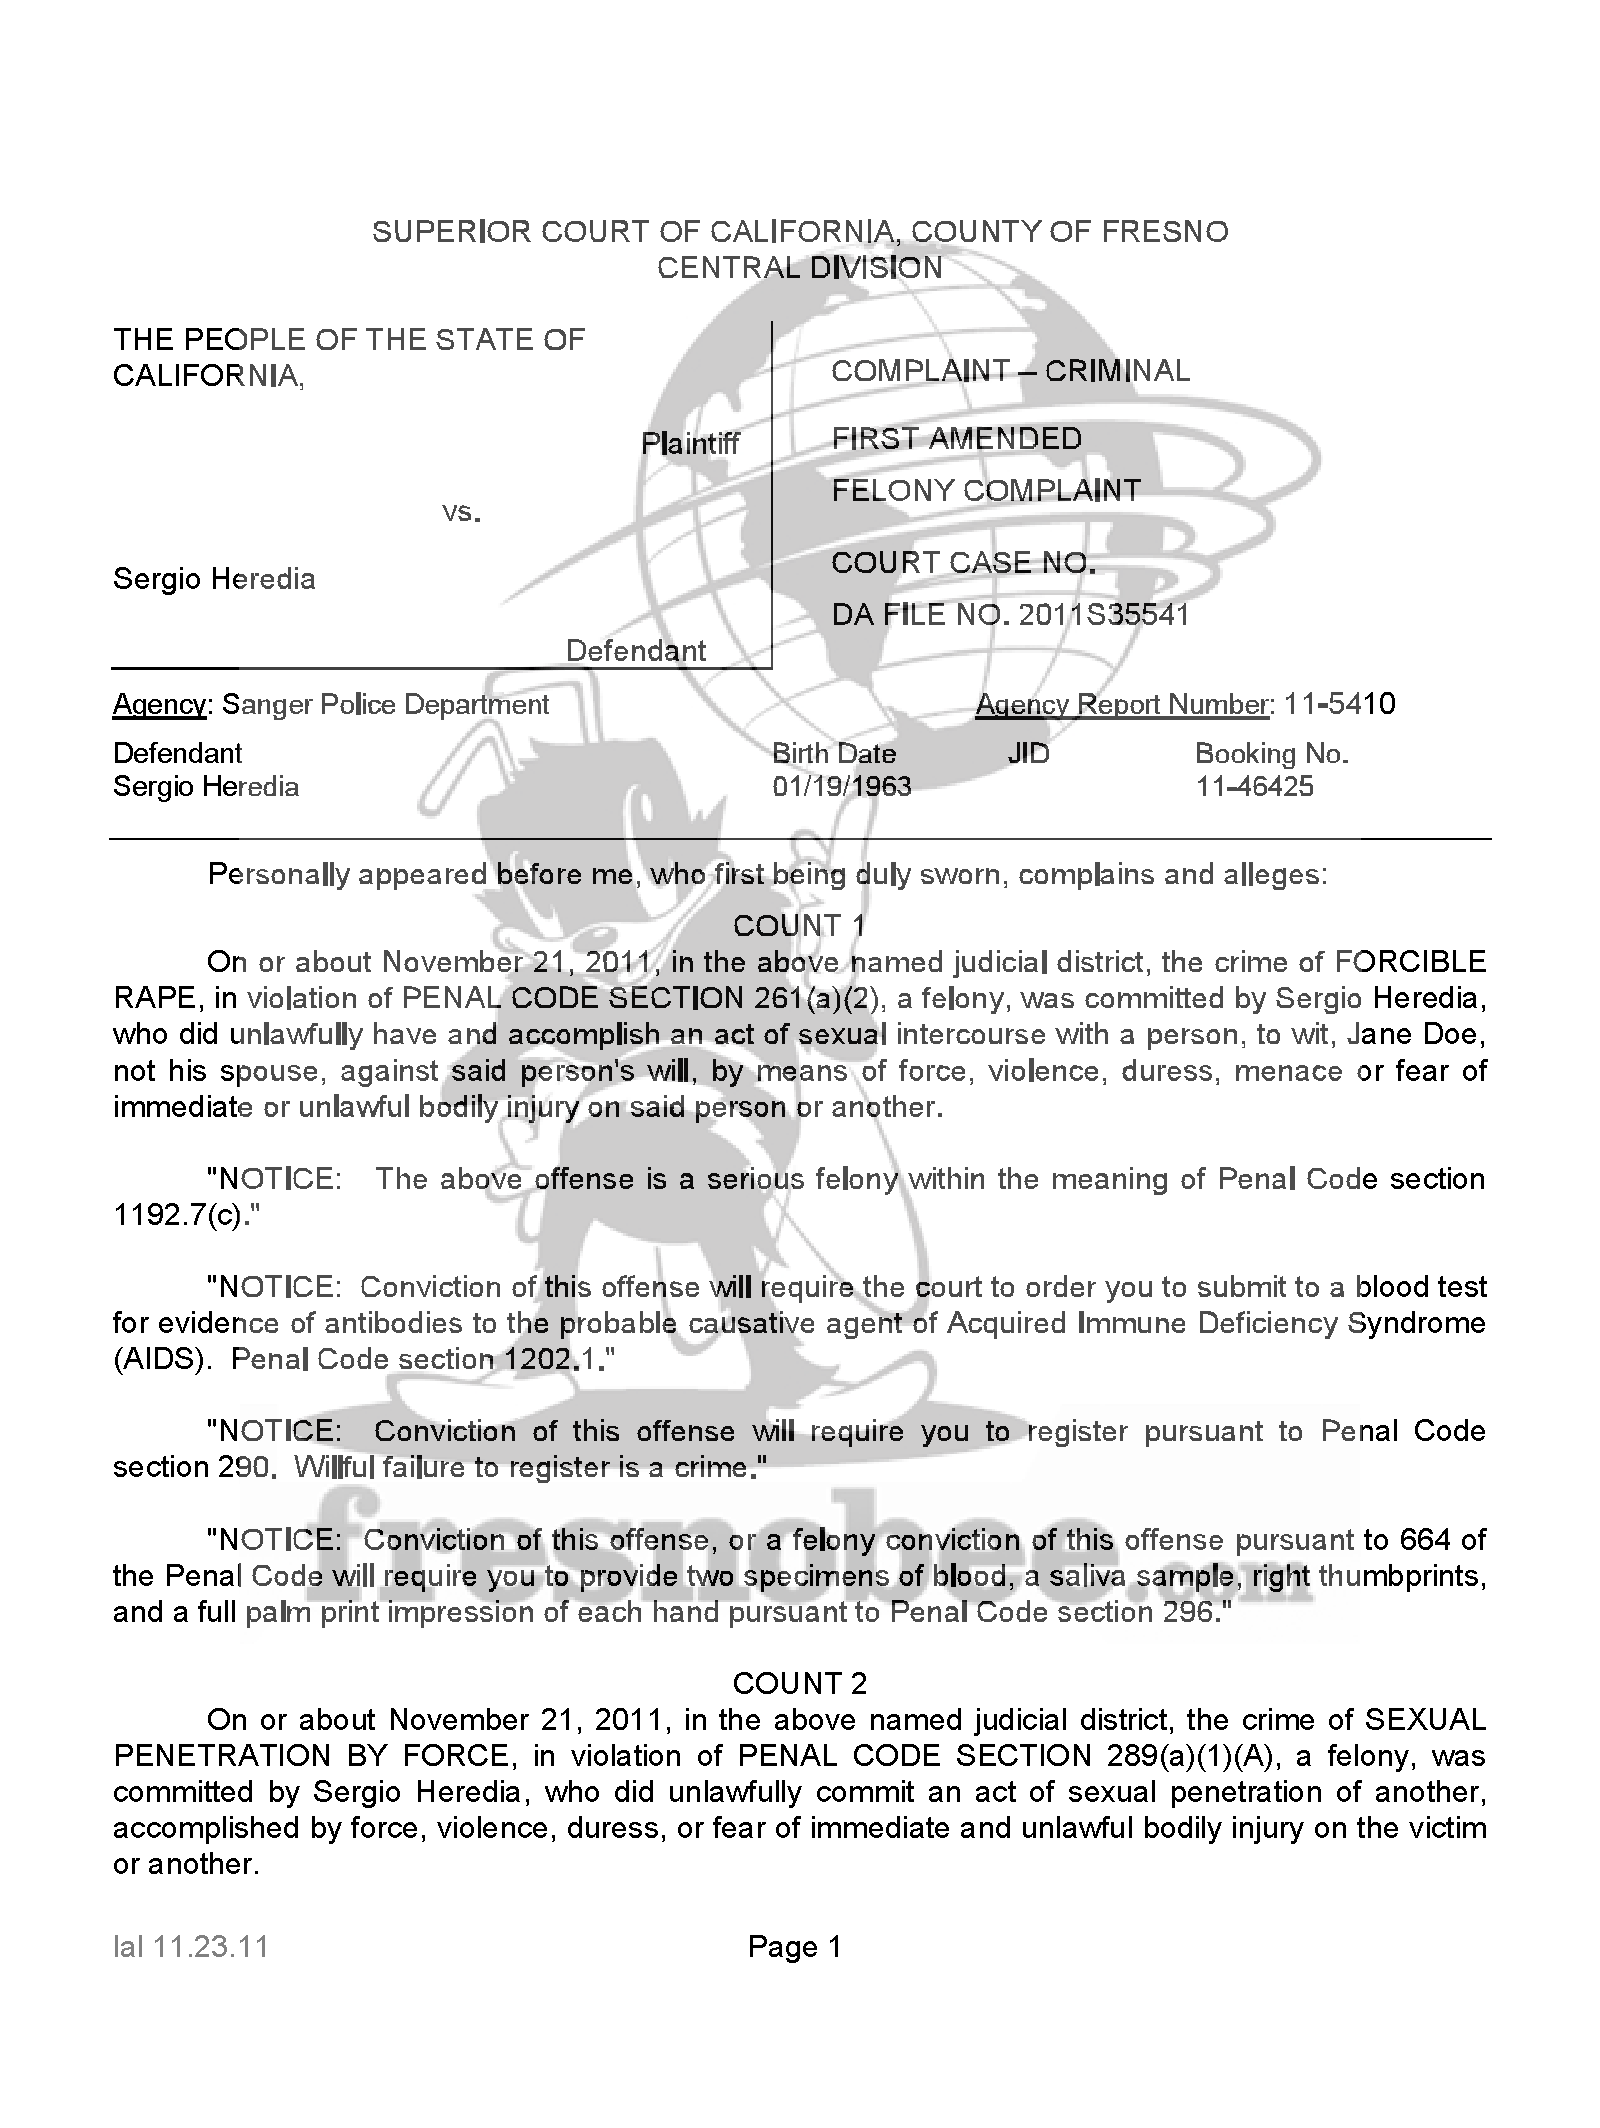 Copy of heredia sergio criminal complaint1.png